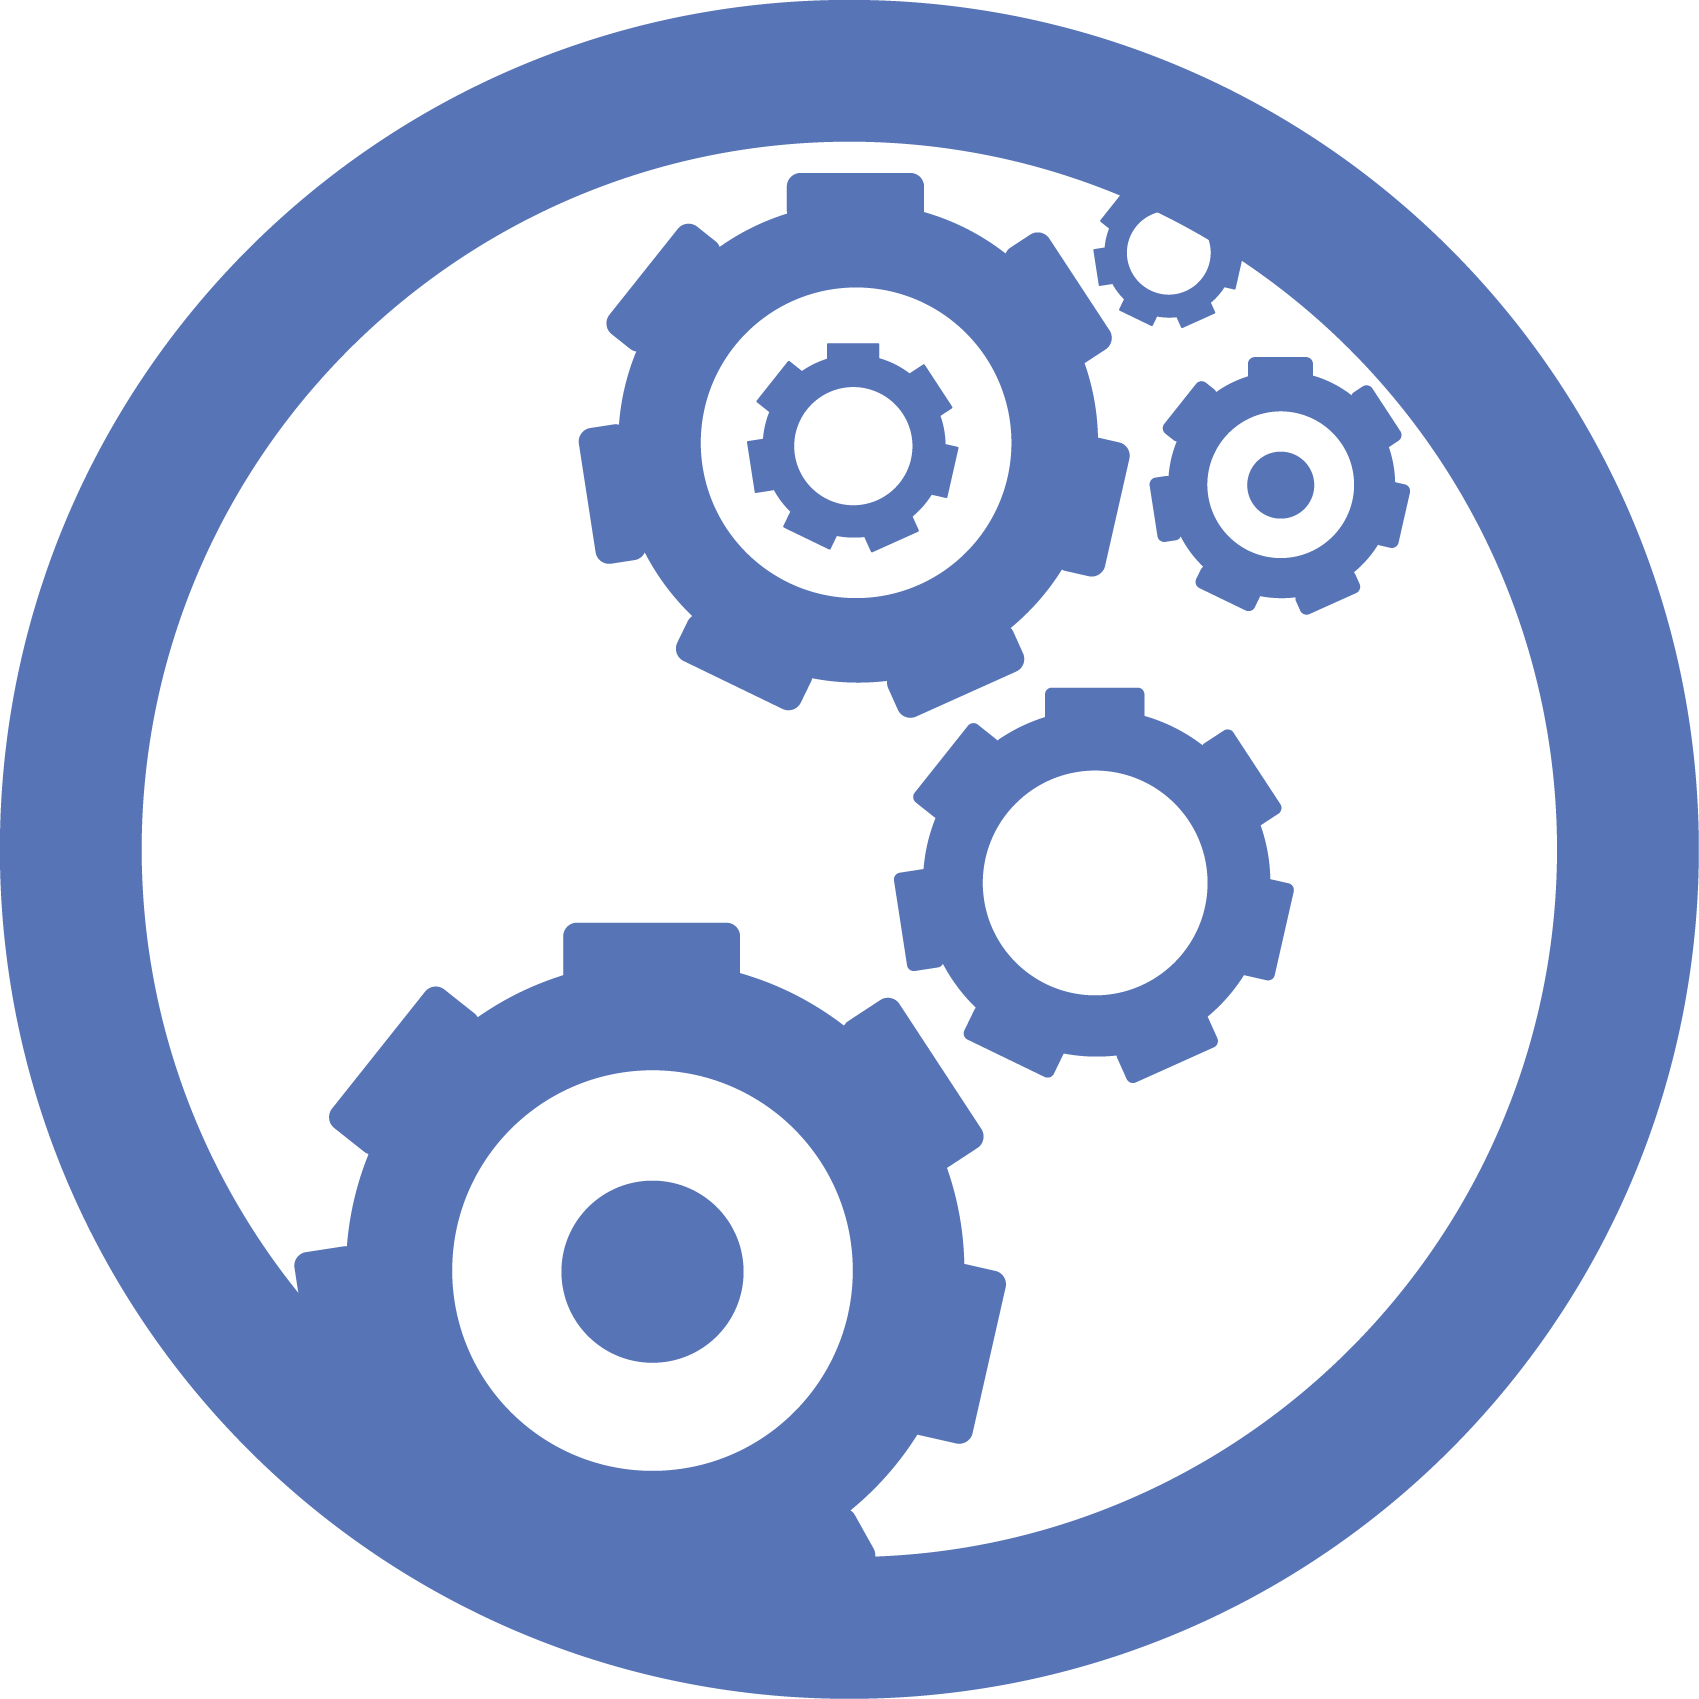 Efficient Task Force Logo - Blue gears enclosed by a blue circle